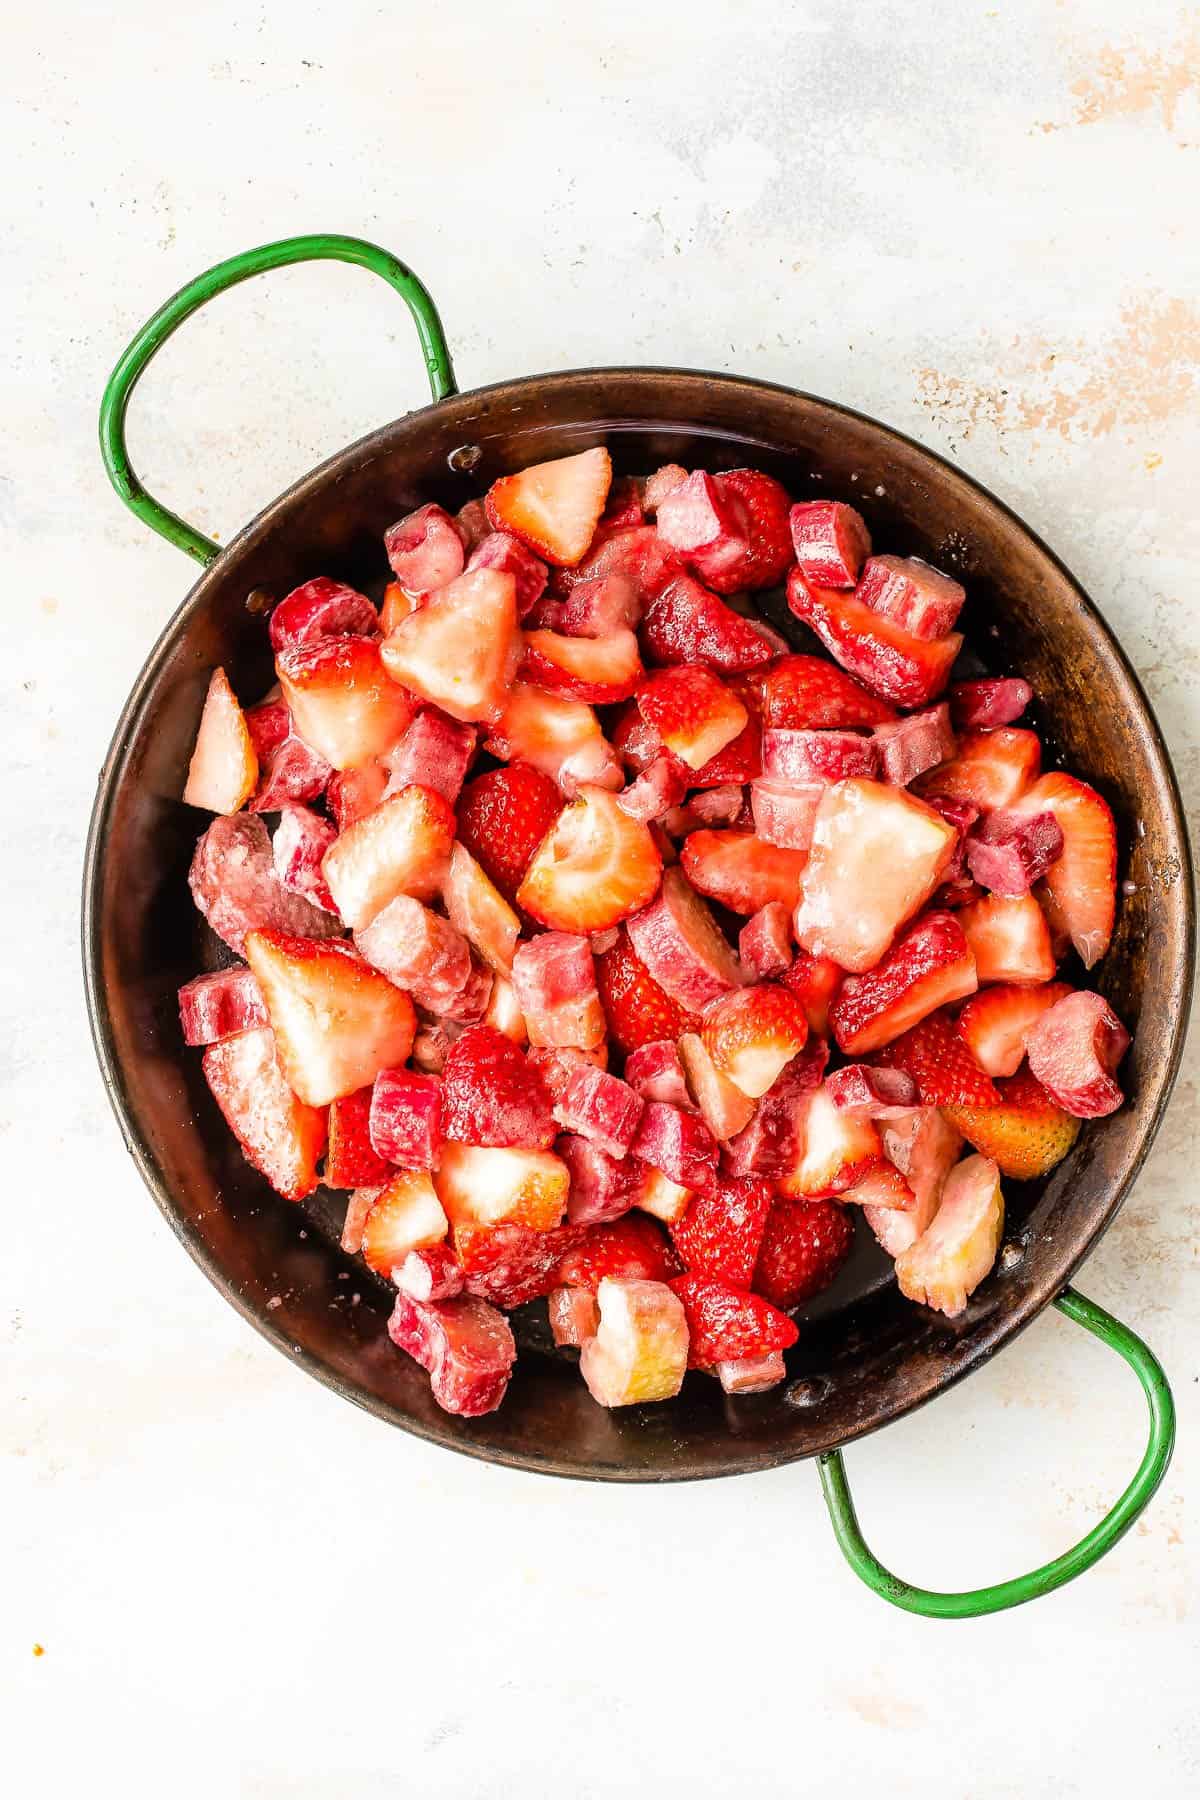 Strawberries and rhubarb in a pan.